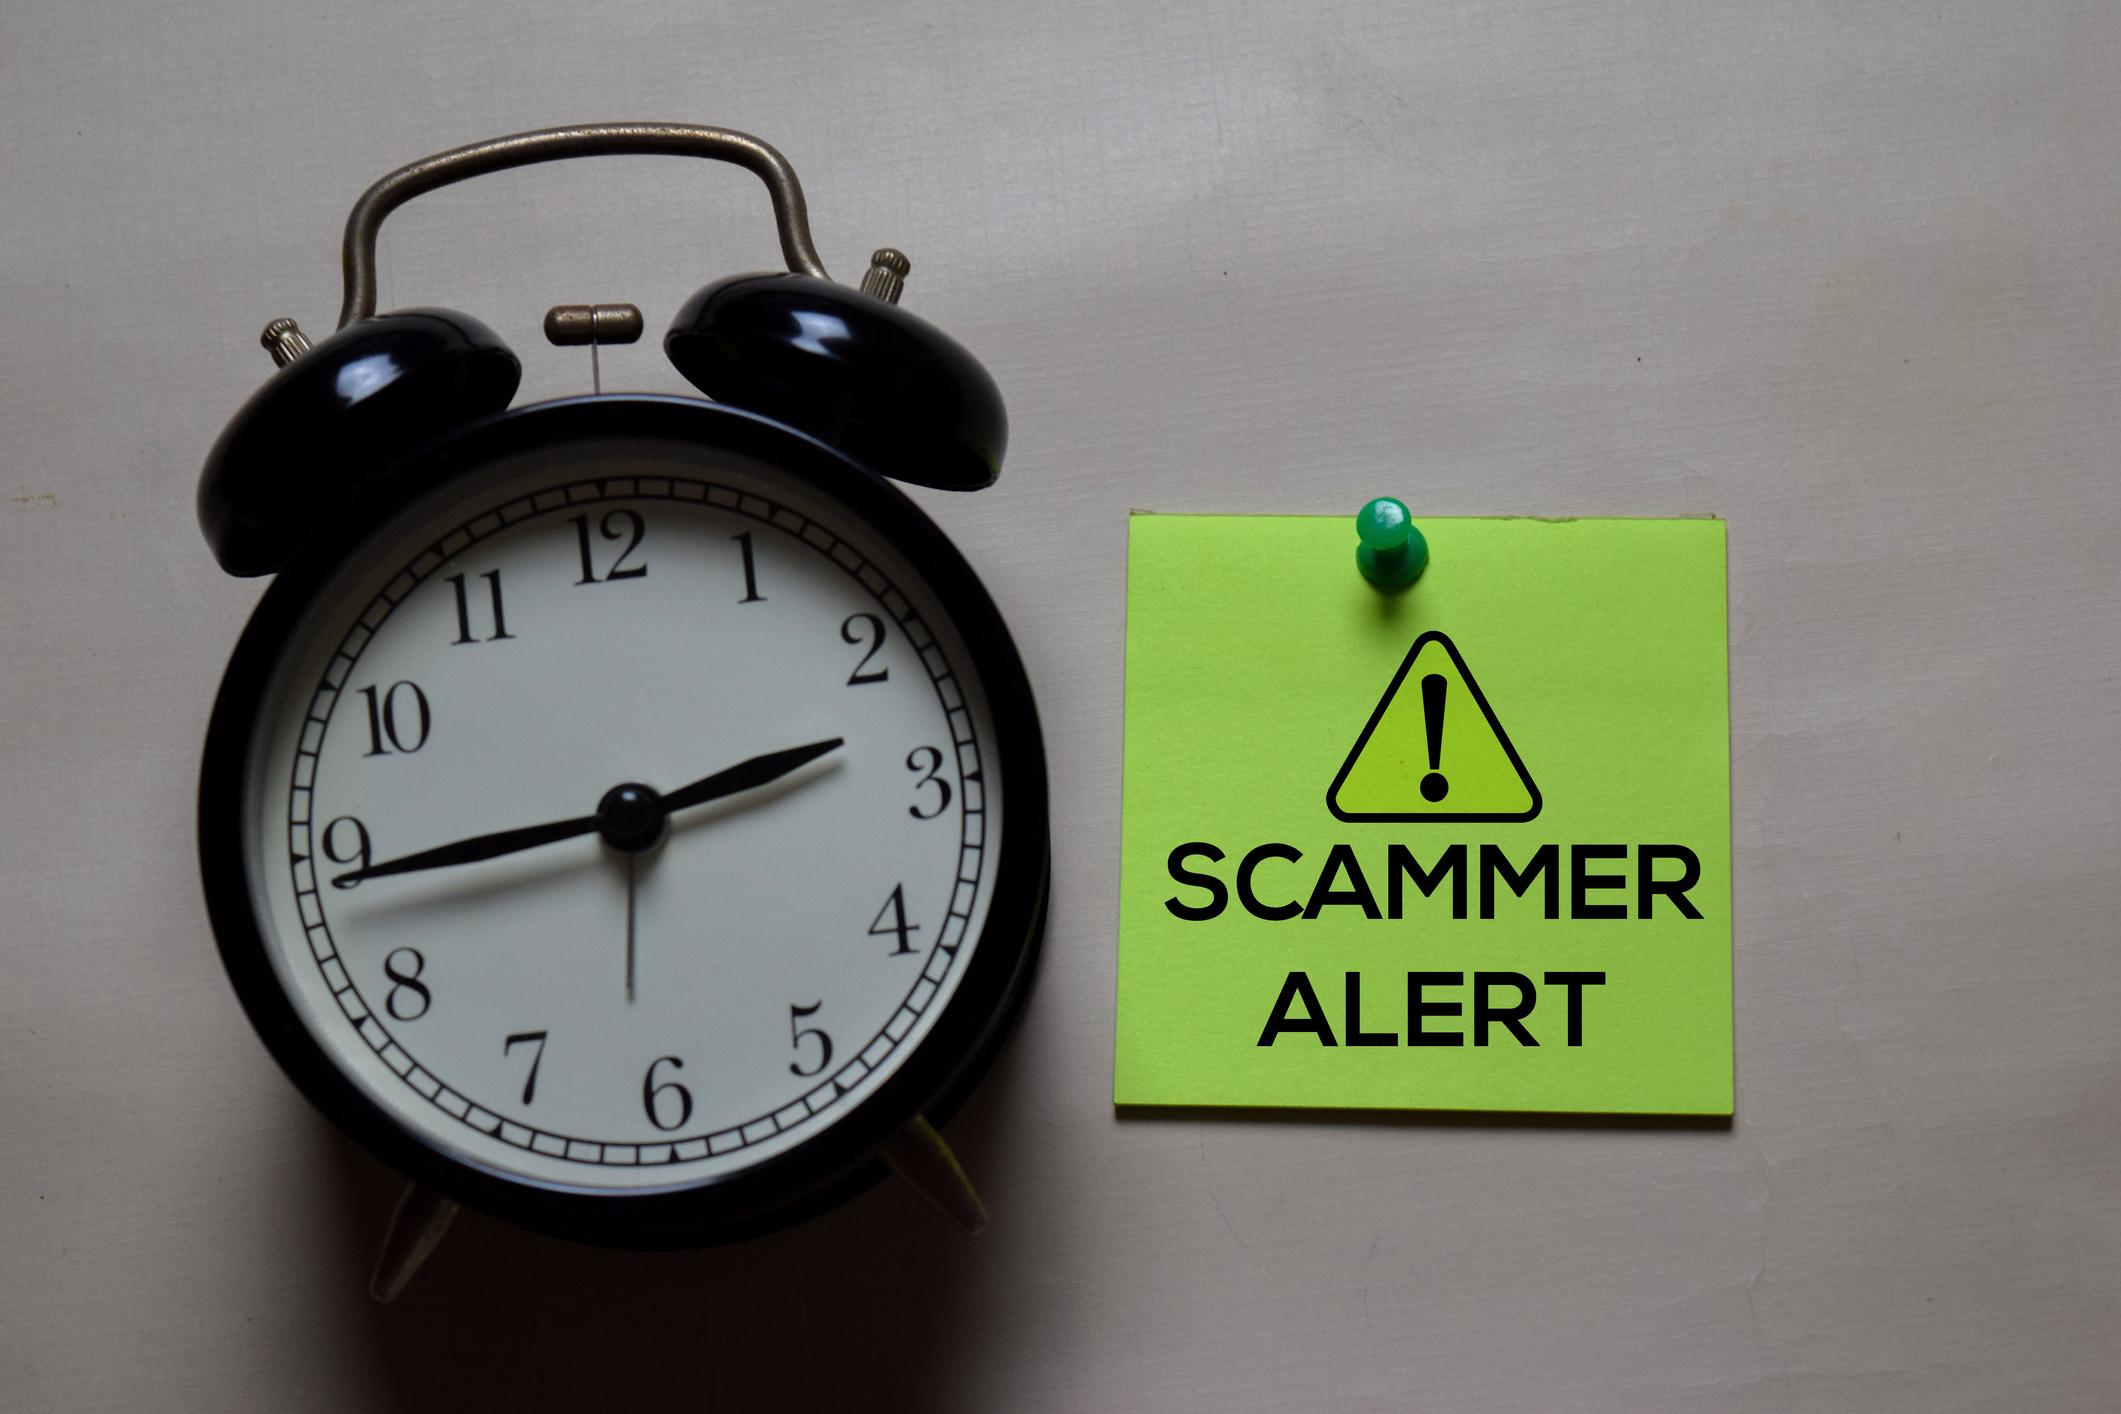 Consumer Alert: Carr Warns Consumers To Beware of Loan Scams